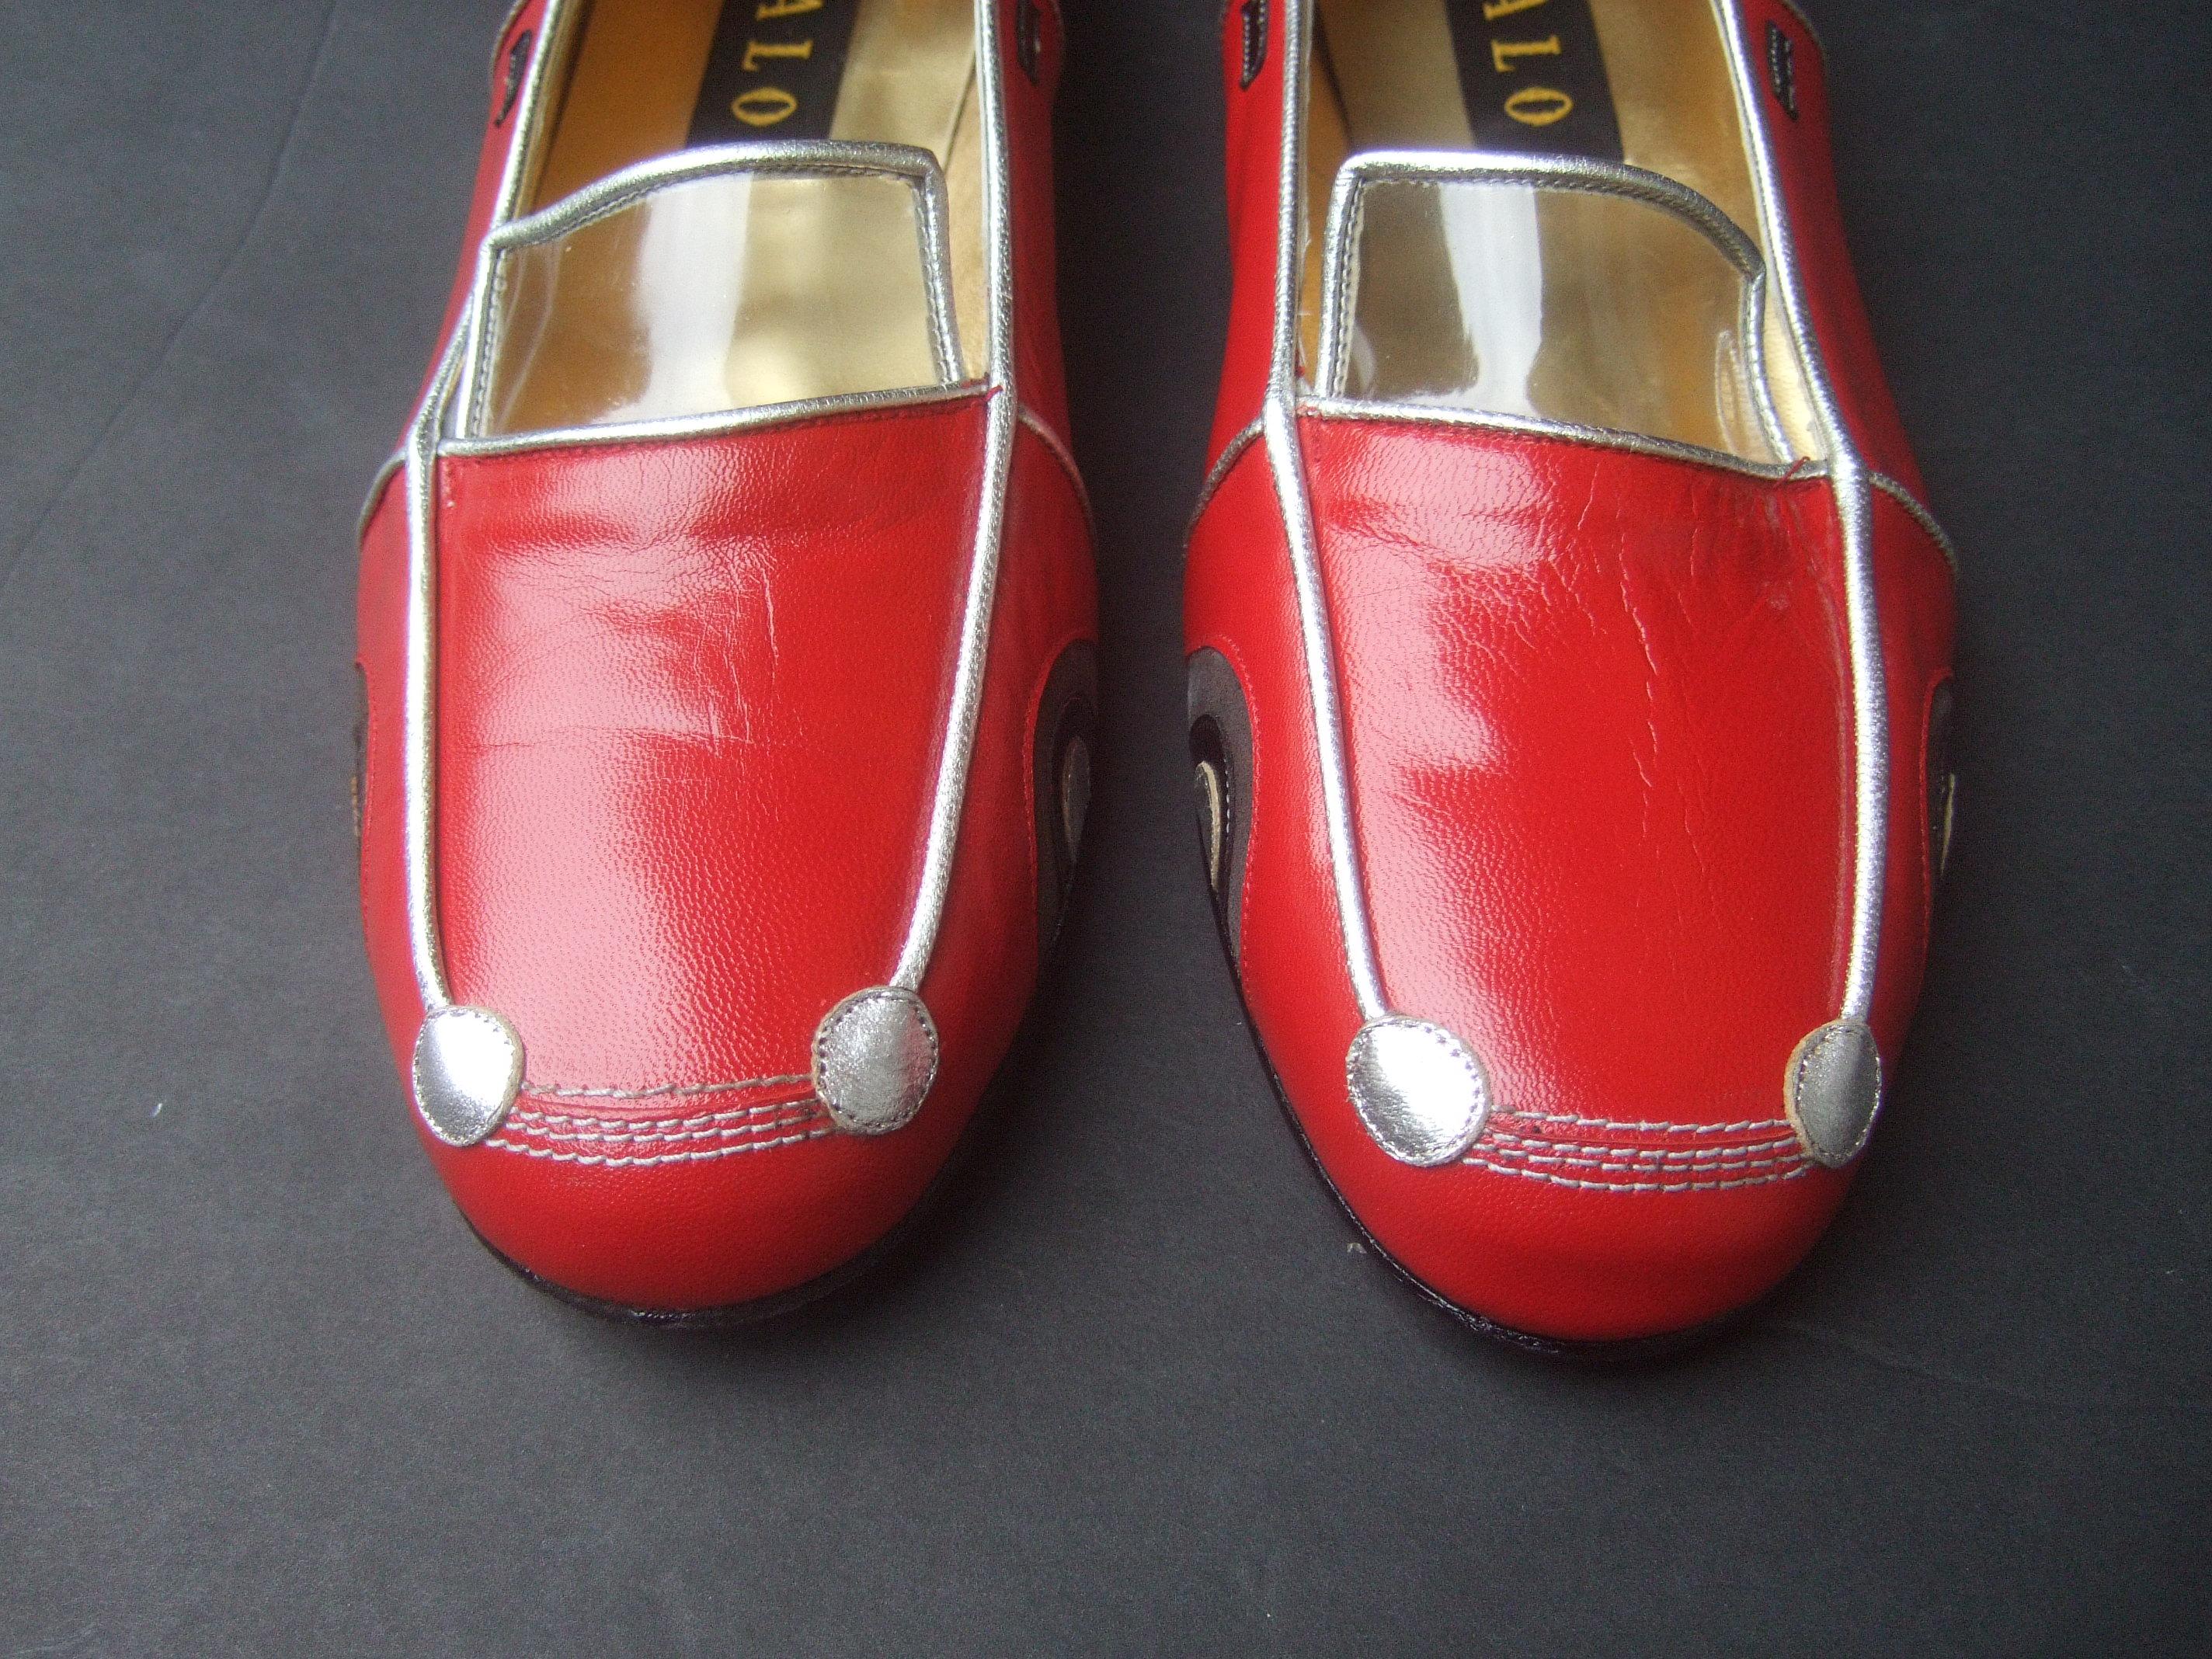 Whimsical Red Leather Sports Car Design Shoes by Zalo US Size 9 M c 1990 5